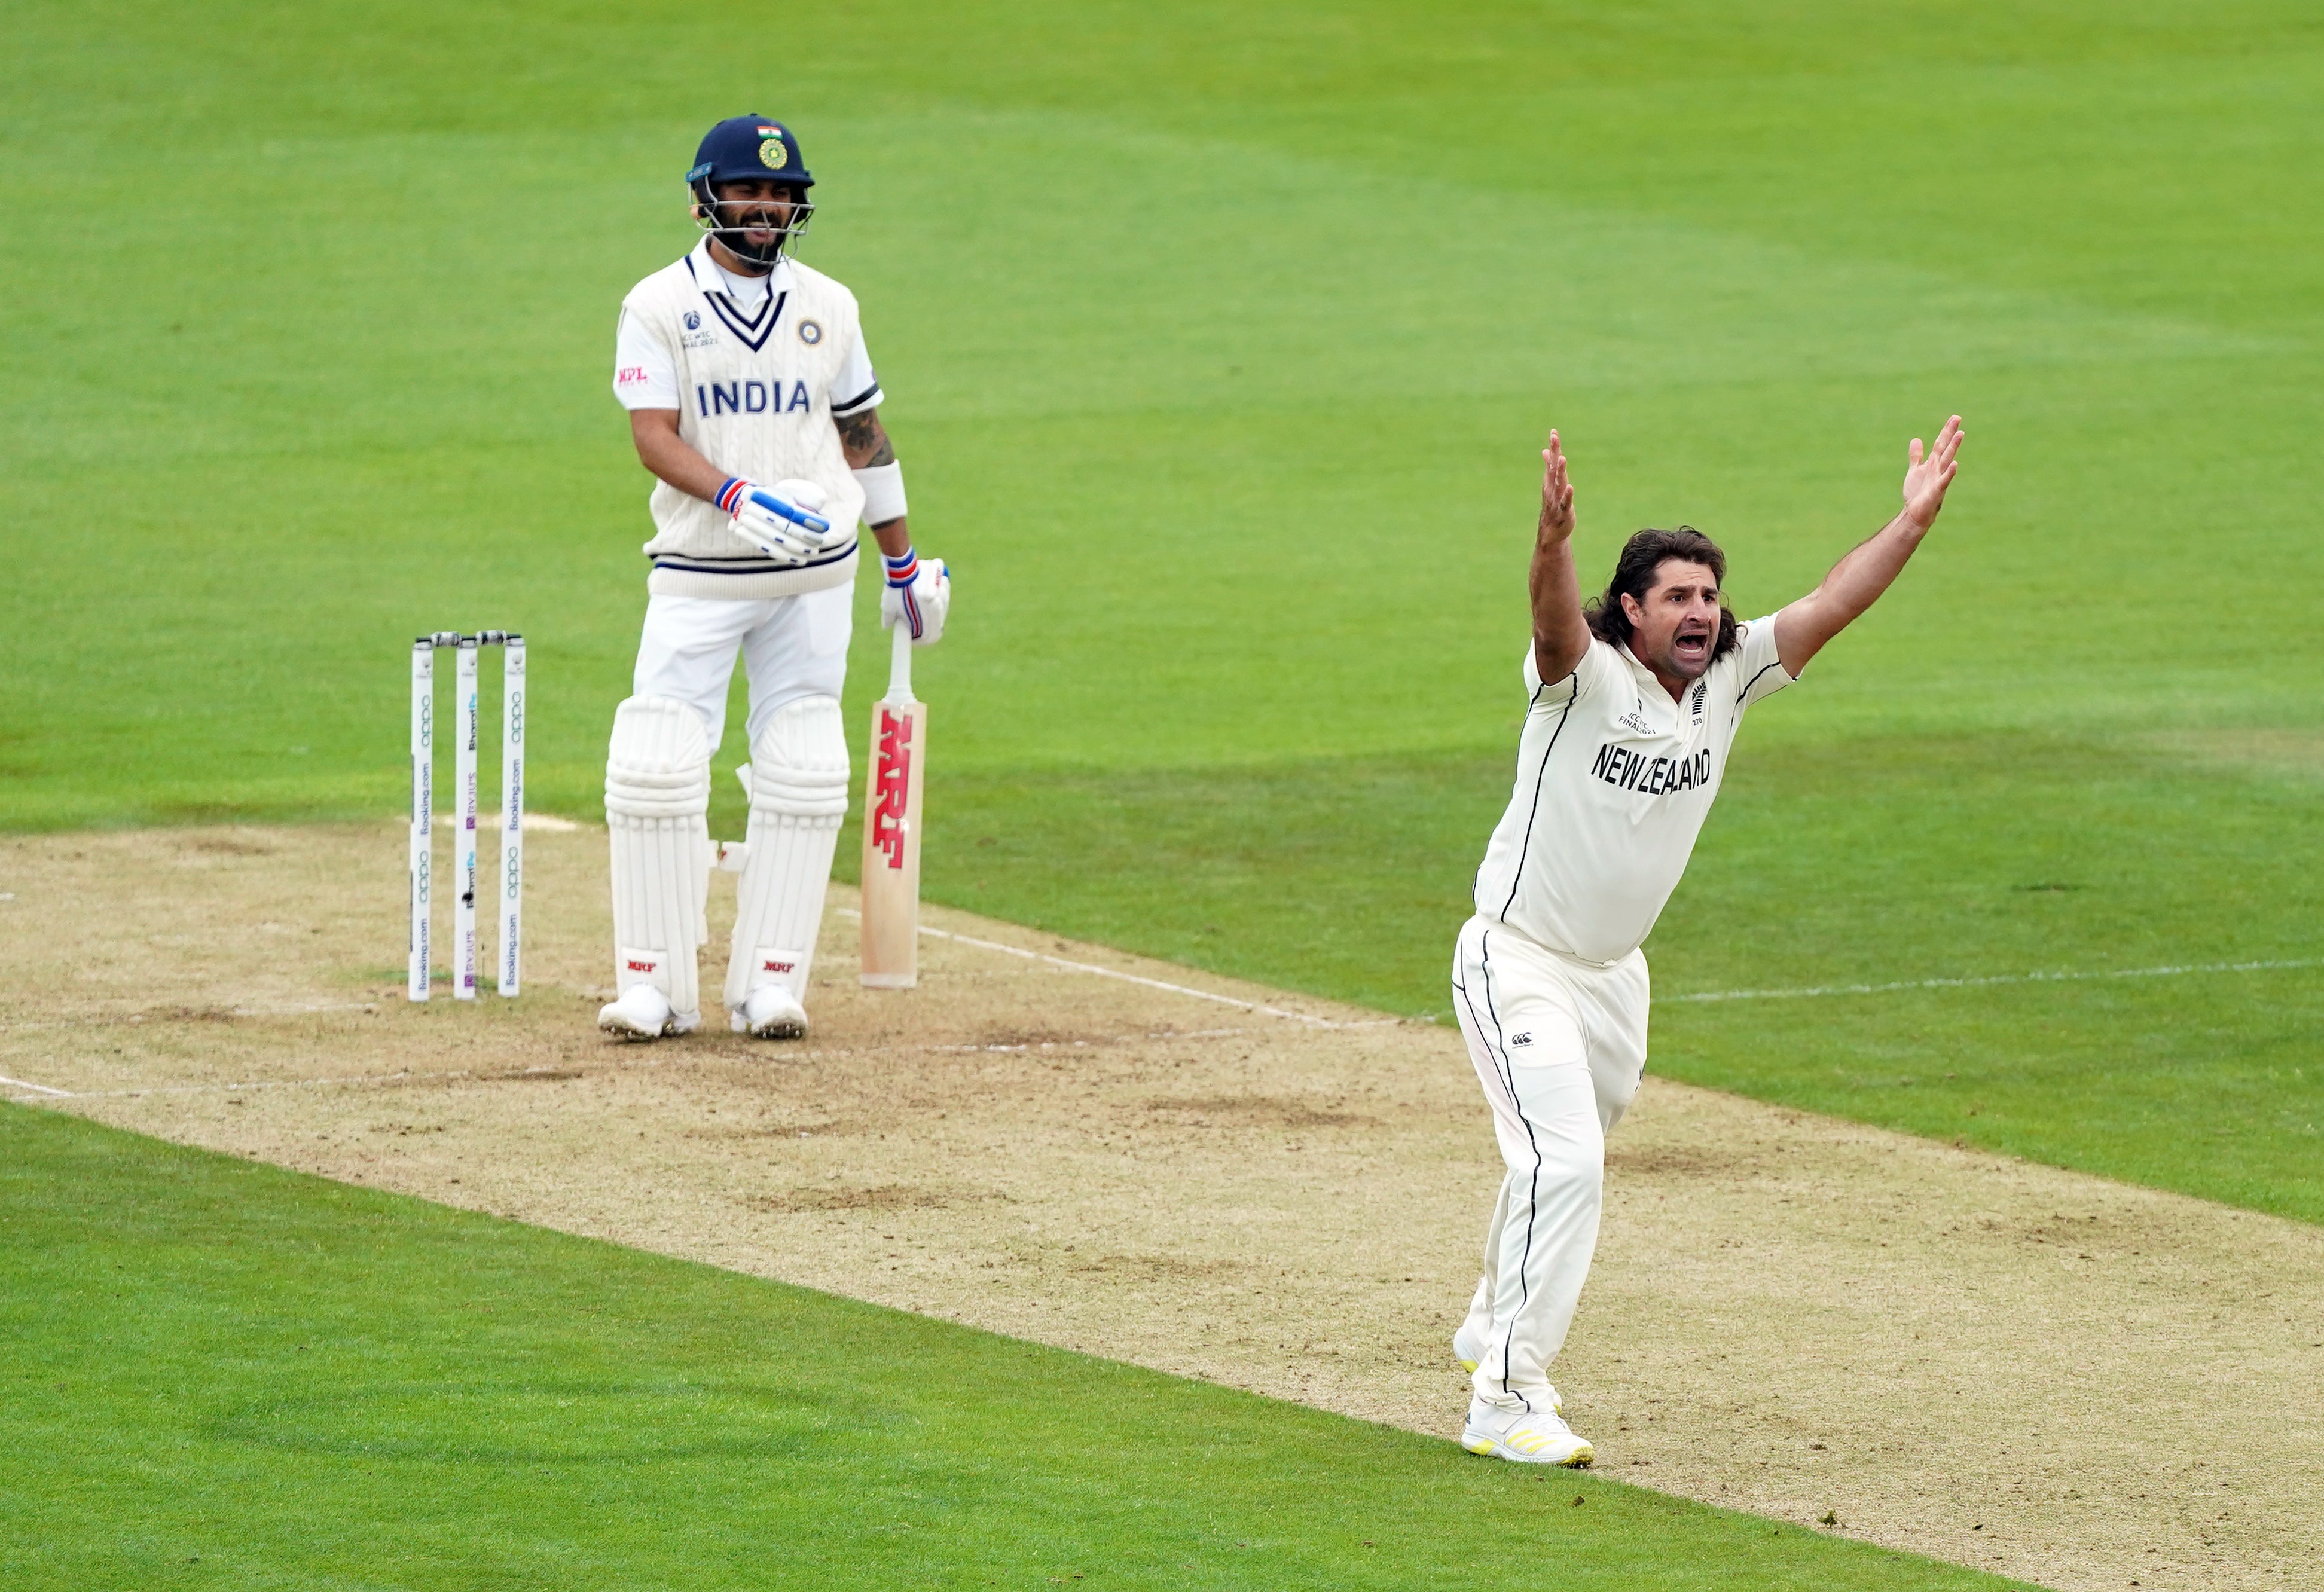 New Zealand’s Colin de Granhomme appeals for the wicket of India’s Virat Kohli during day two of the World Test Championship final match at The Ageas Bowl